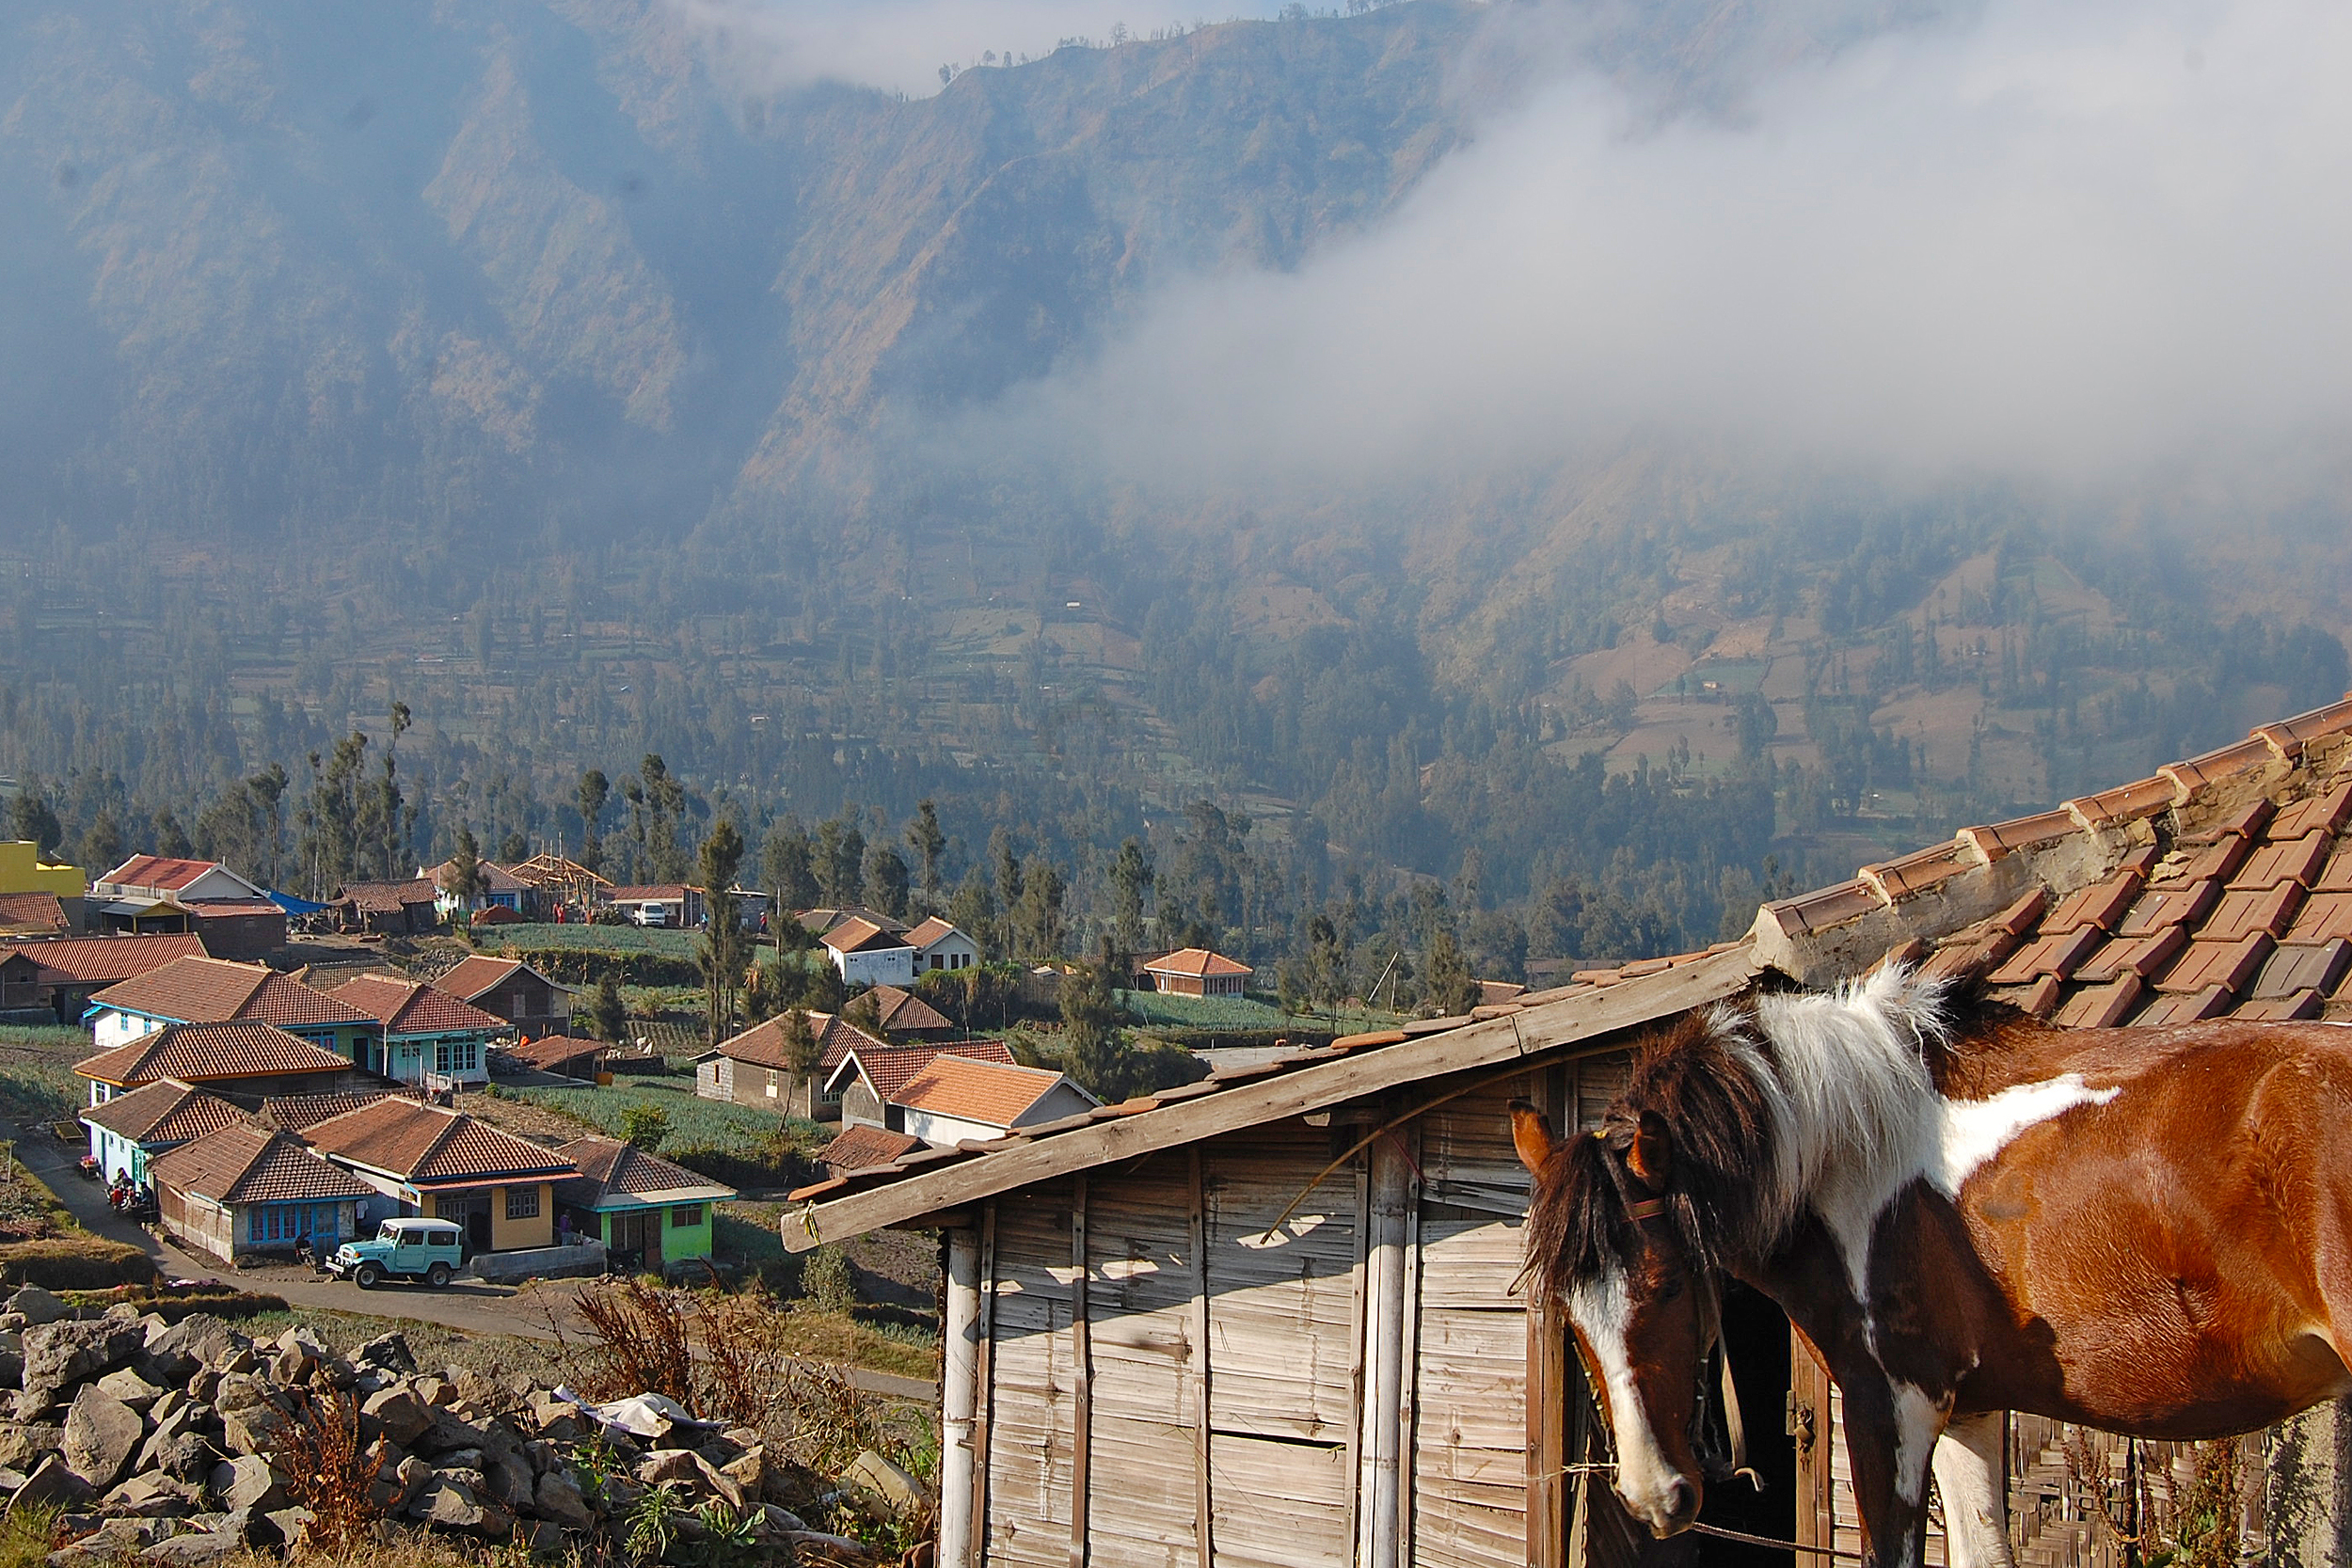 A horse among houses in the mountains